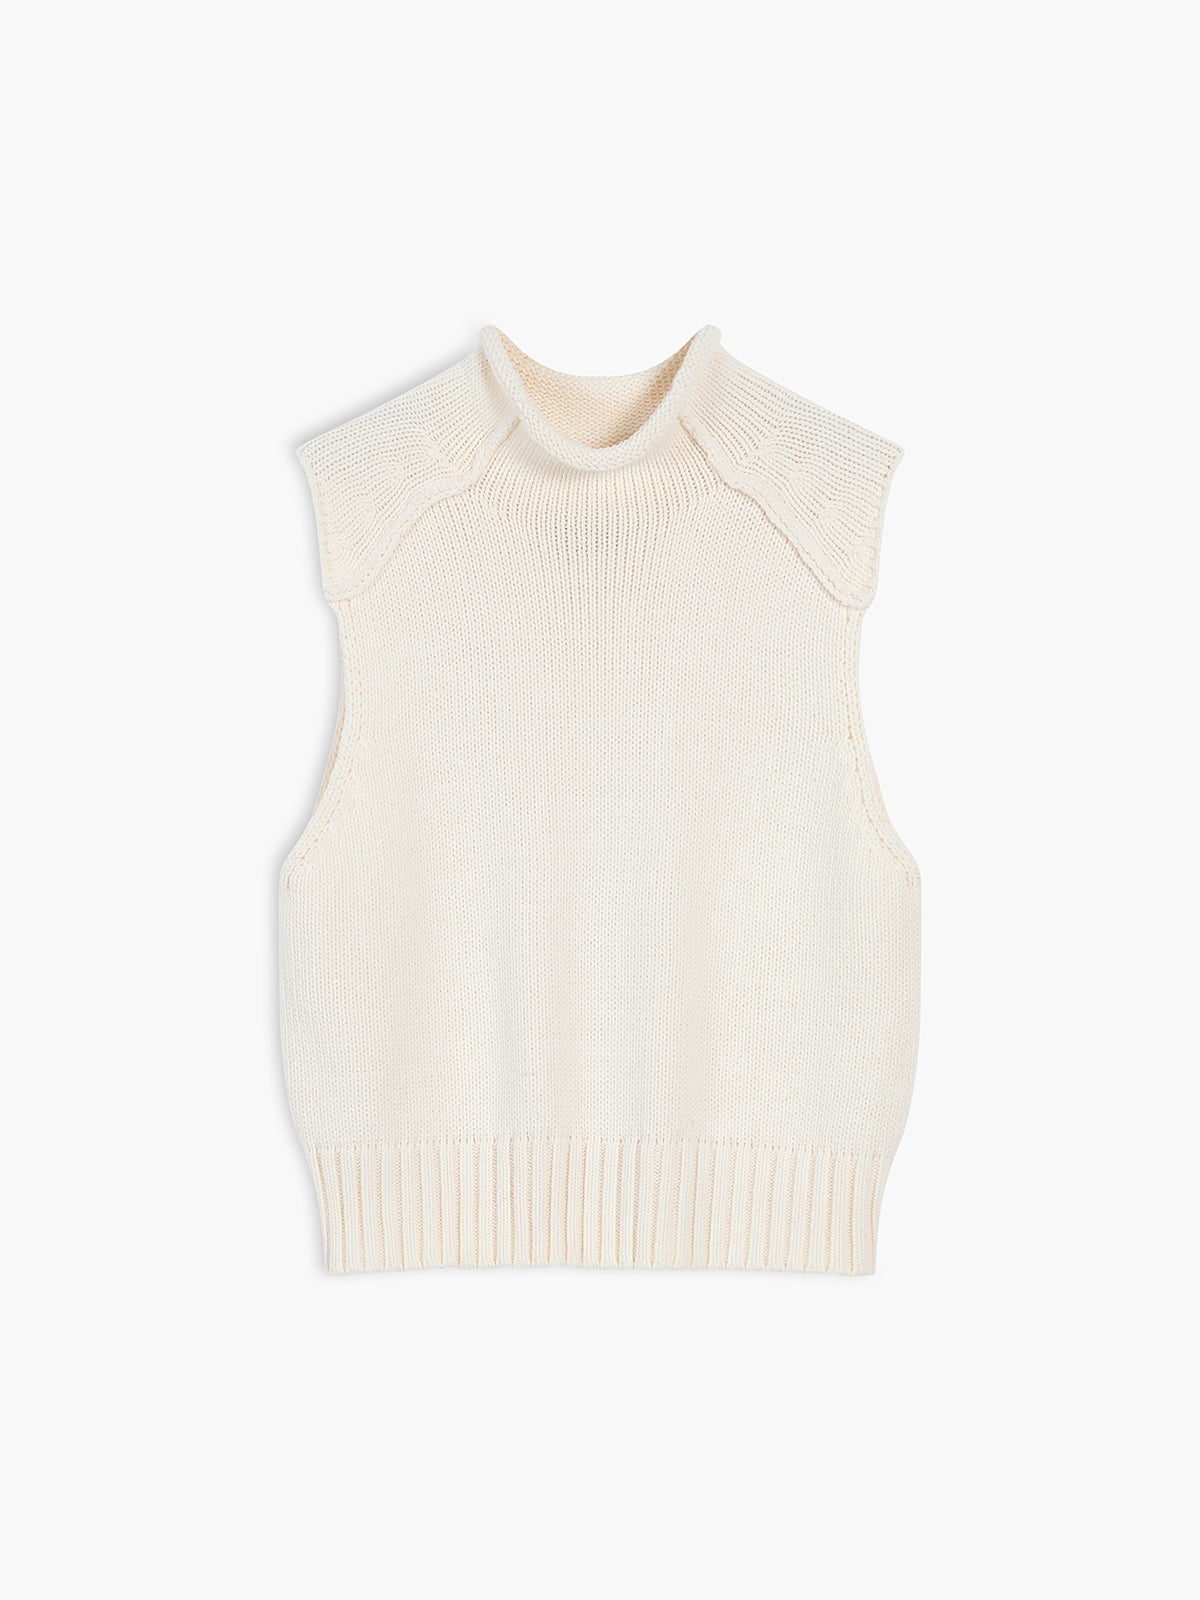 Love At First Sight Mock Neck Sweater Vest